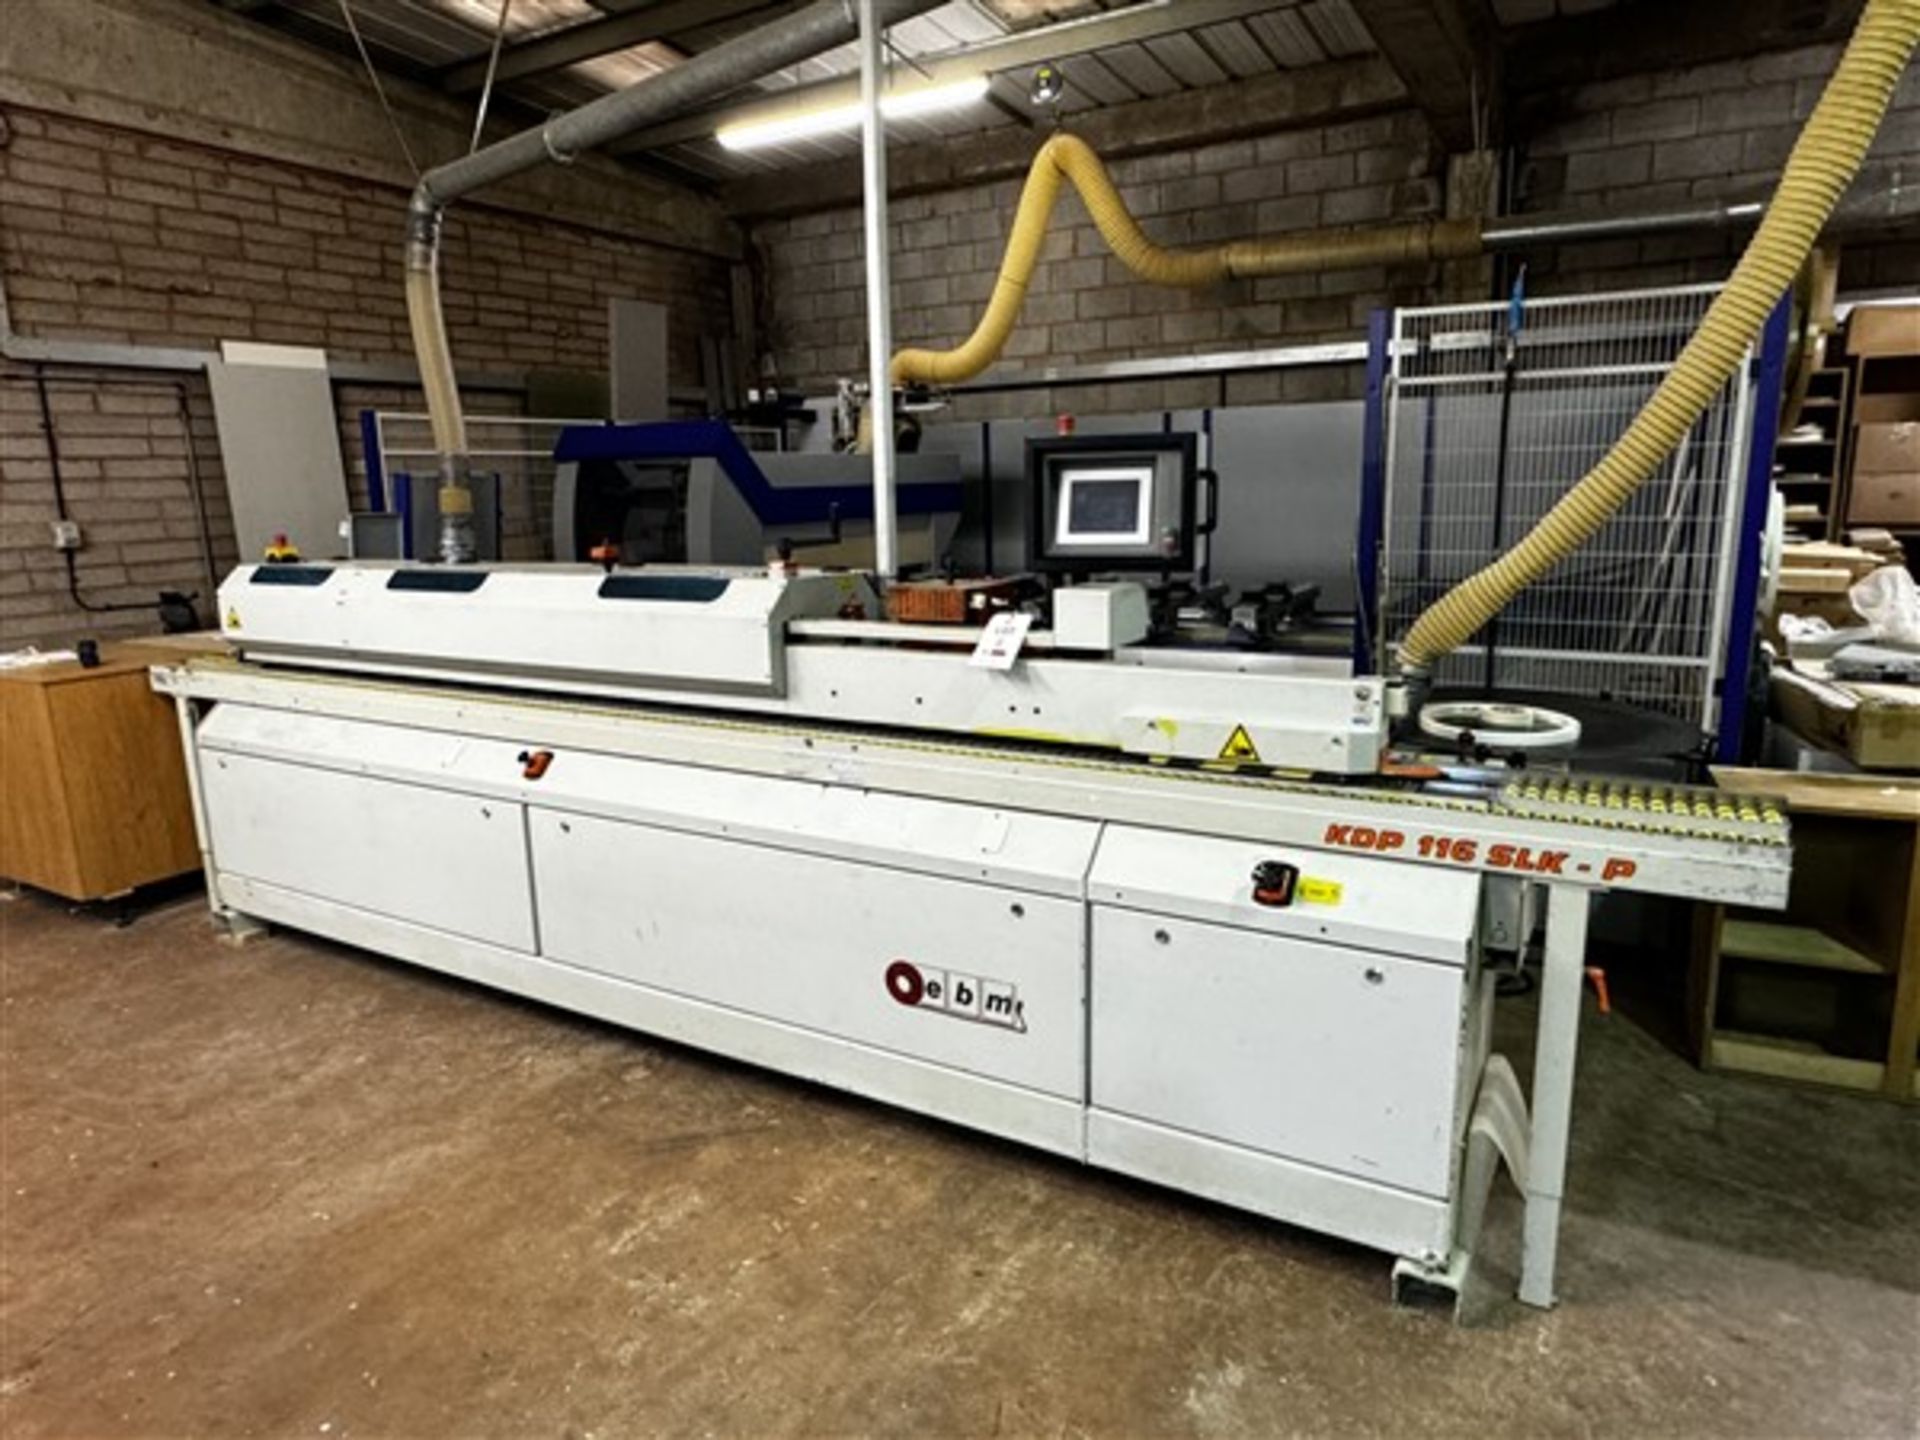 EBM edge bander, type KDP 116 SLK-P, serial no. 1482, year 2008 (Please note: this lot will